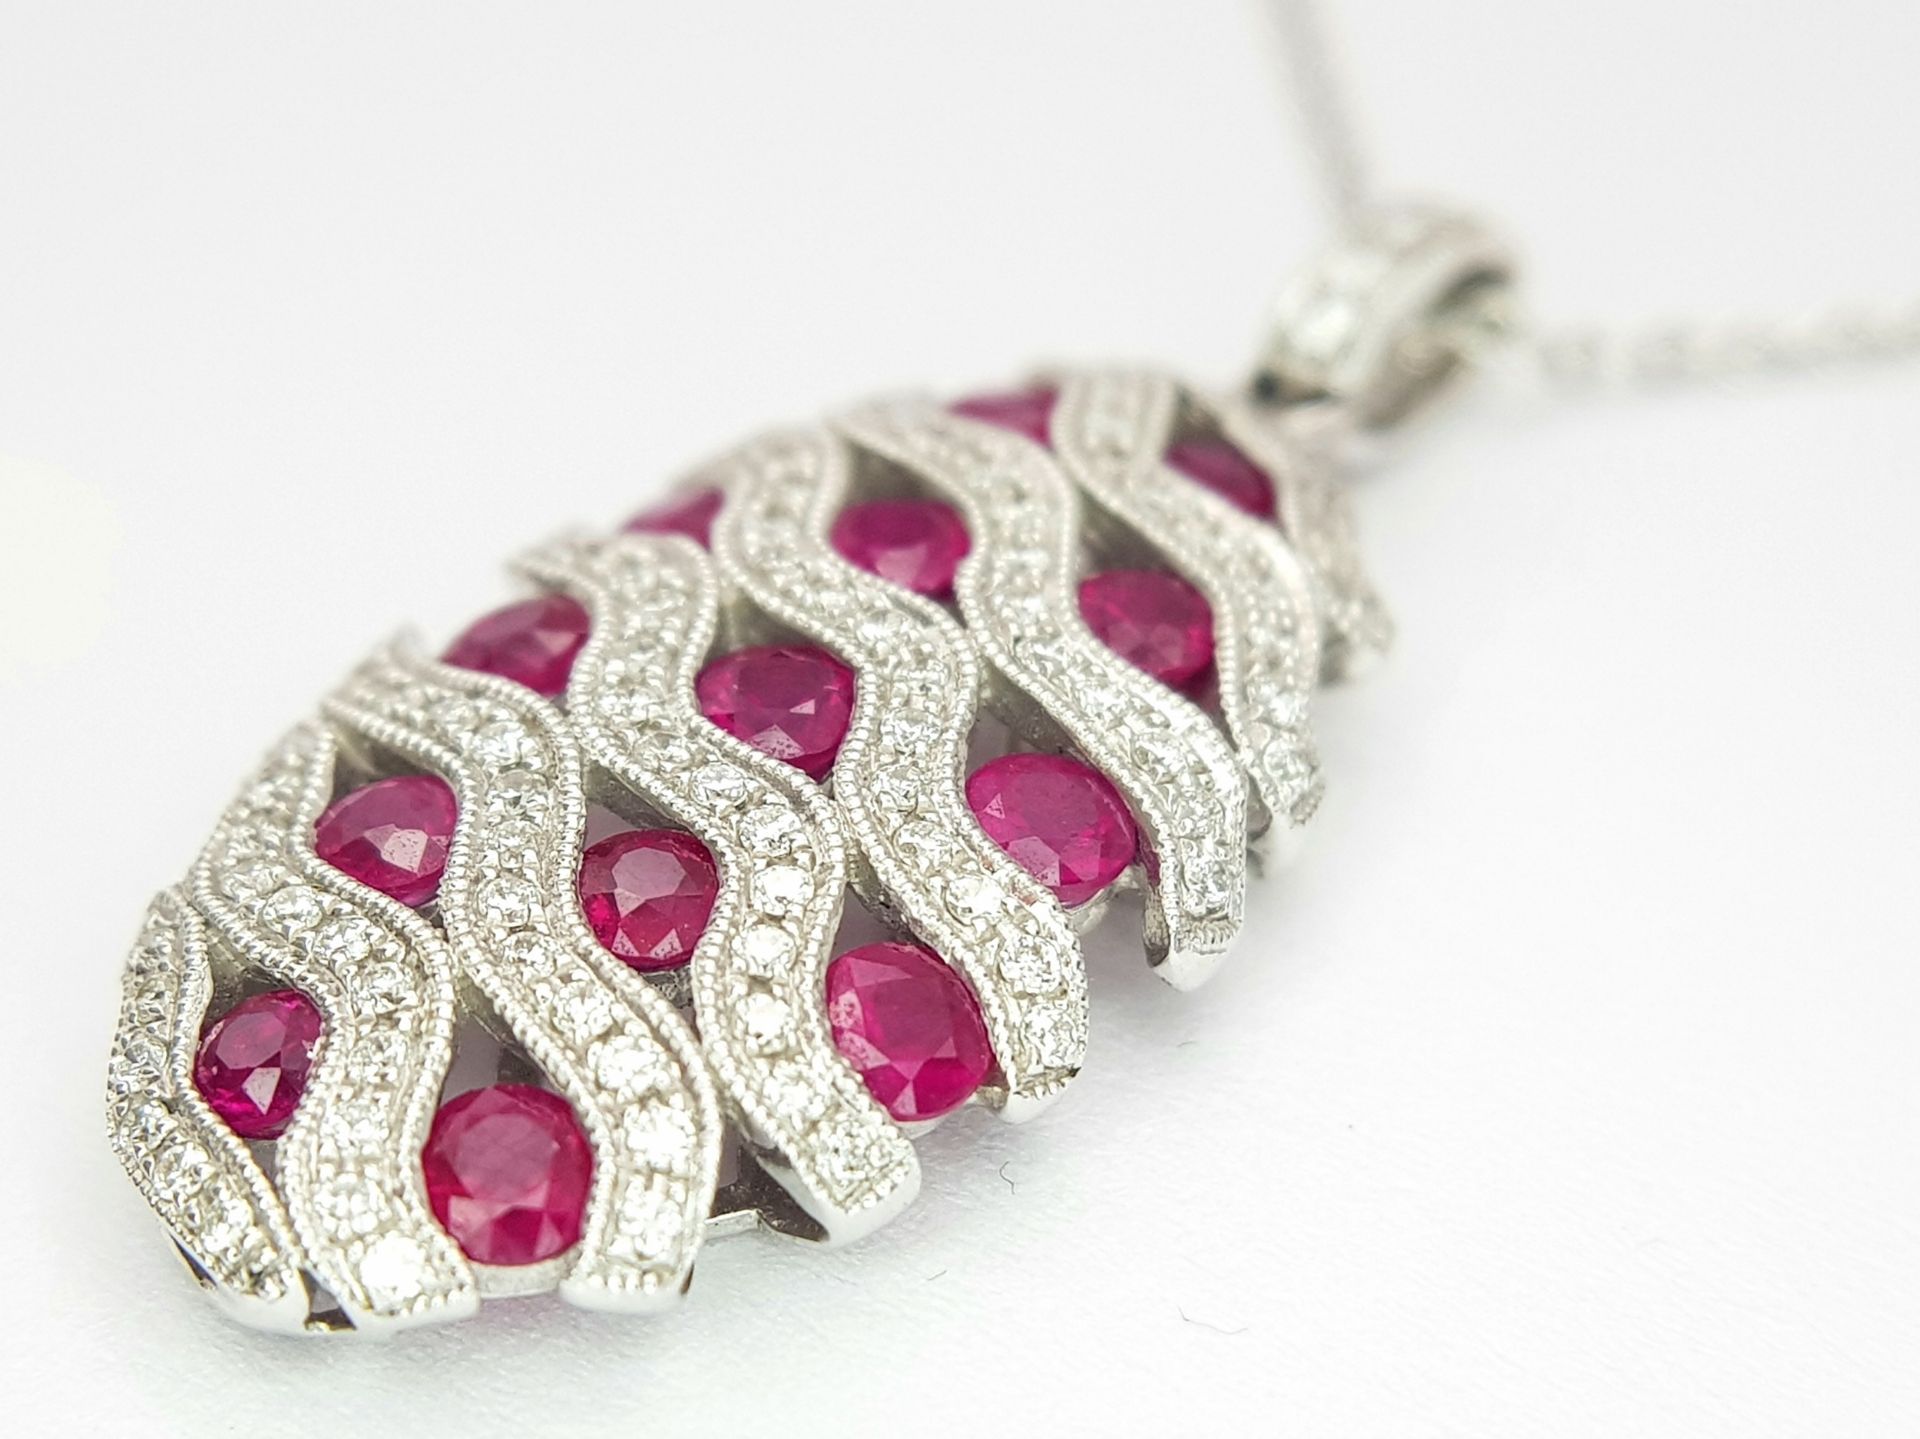 AN 18K WHITE GOLD DIAMOND AND RUBY PENDANT - 0.49CT OF DIAMONDS AND 2.29CT OF RUBIES. 6.2G WEIGHT. - Bild 7 aus 16